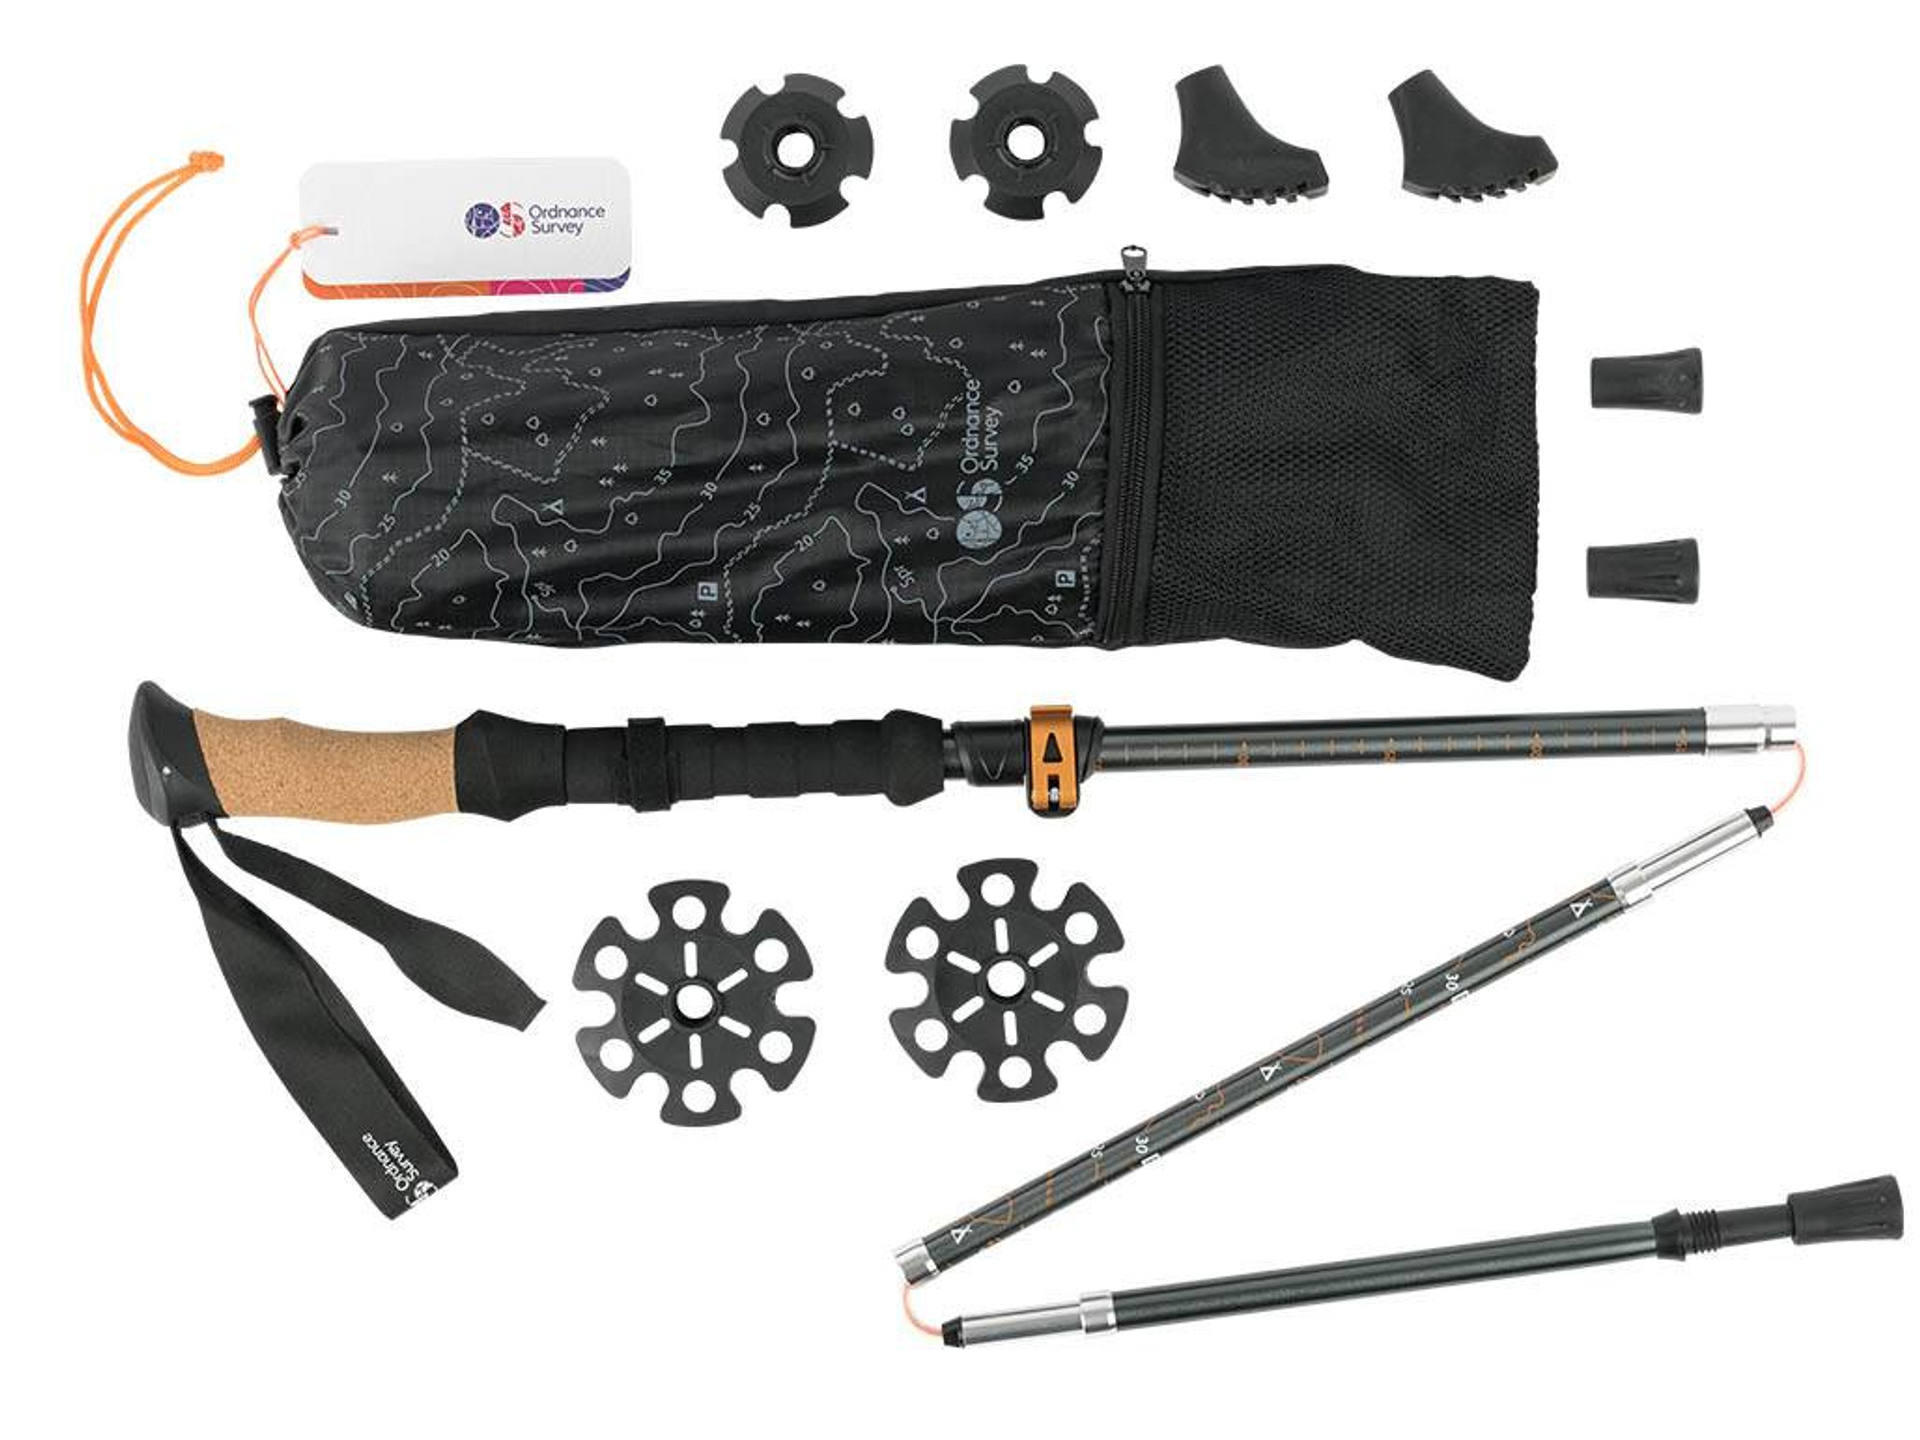 OS Hiking Poles with Bag and tips